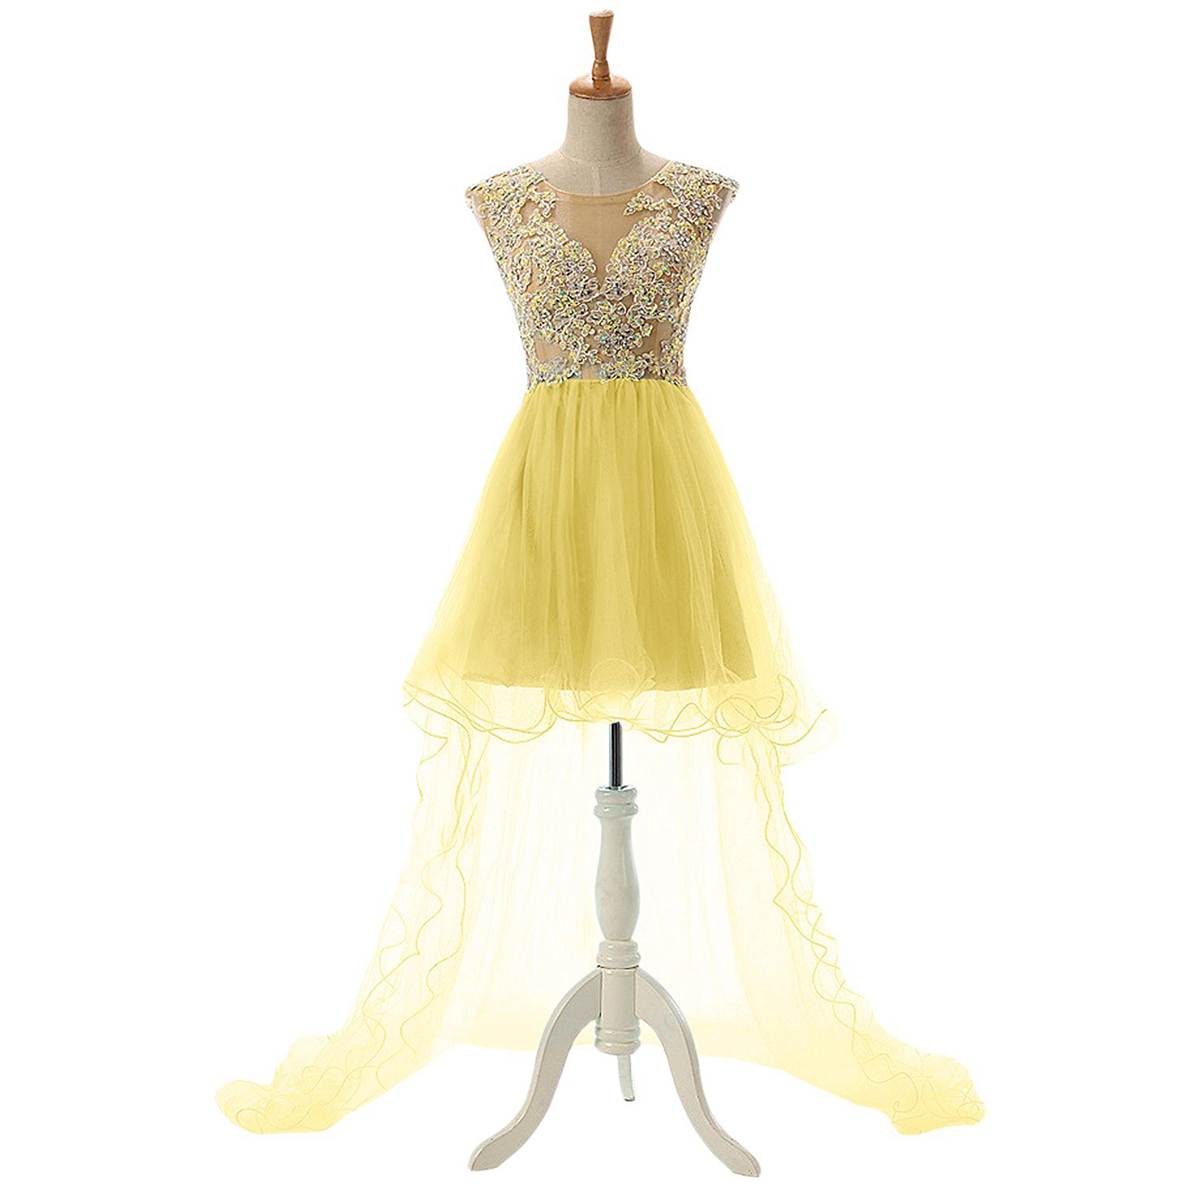 Scoop Neck See-through Lace Appliques Tulle Prom Dress, Crystal Open Back High Low Prom Dress, Cap Sleeves Yellow Prom Dress